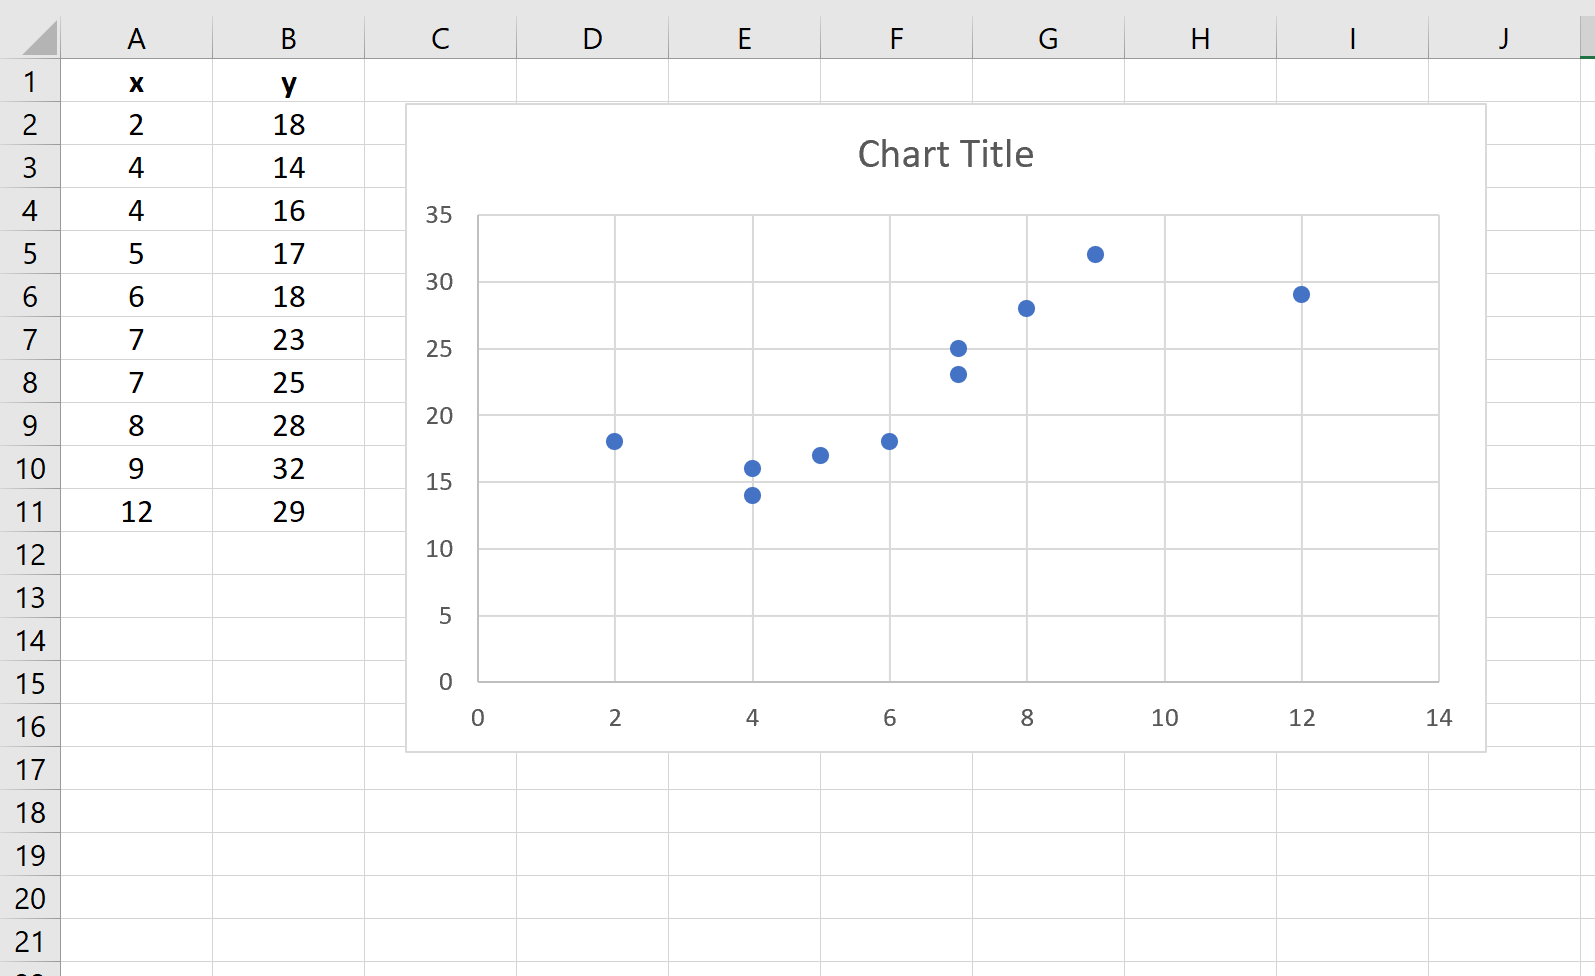 Cubic relationship in scatterplot in Excel example